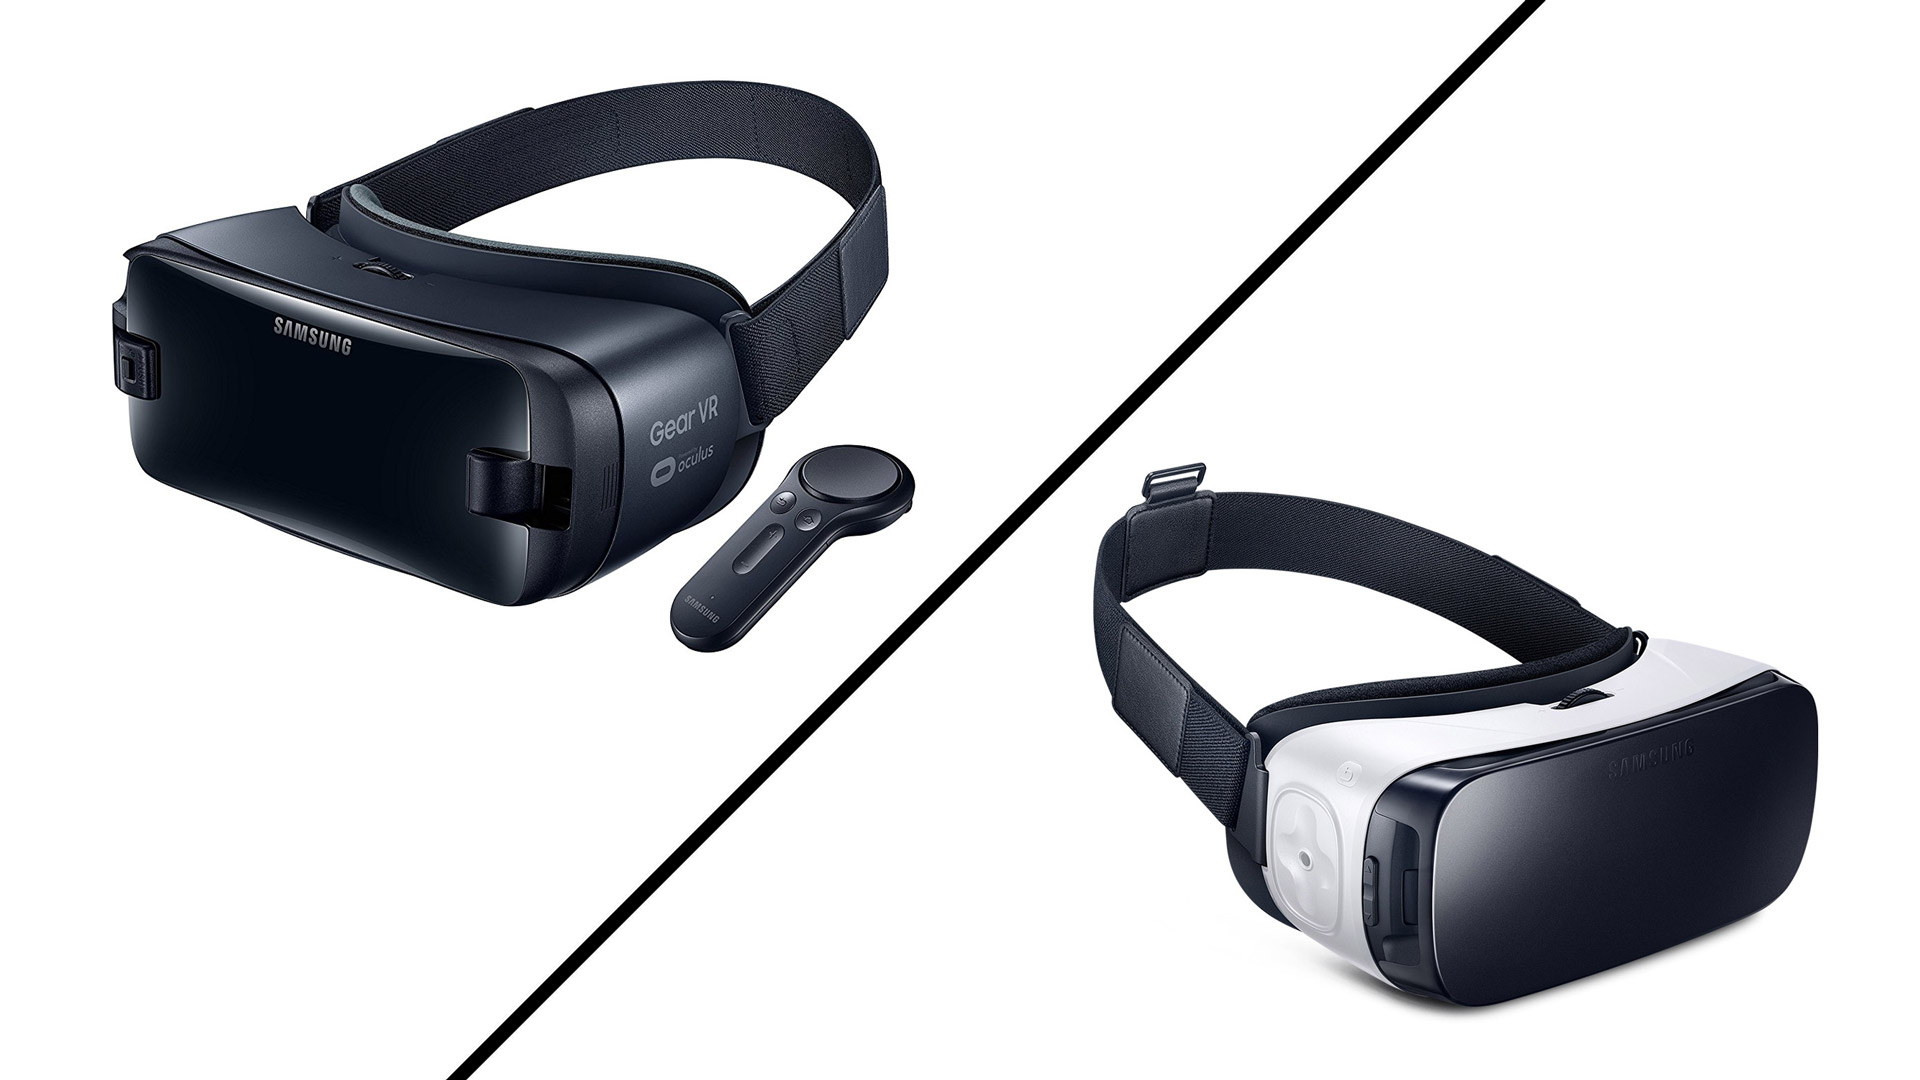 How Does The Samsung Gear VR Differ From Oculus Rift